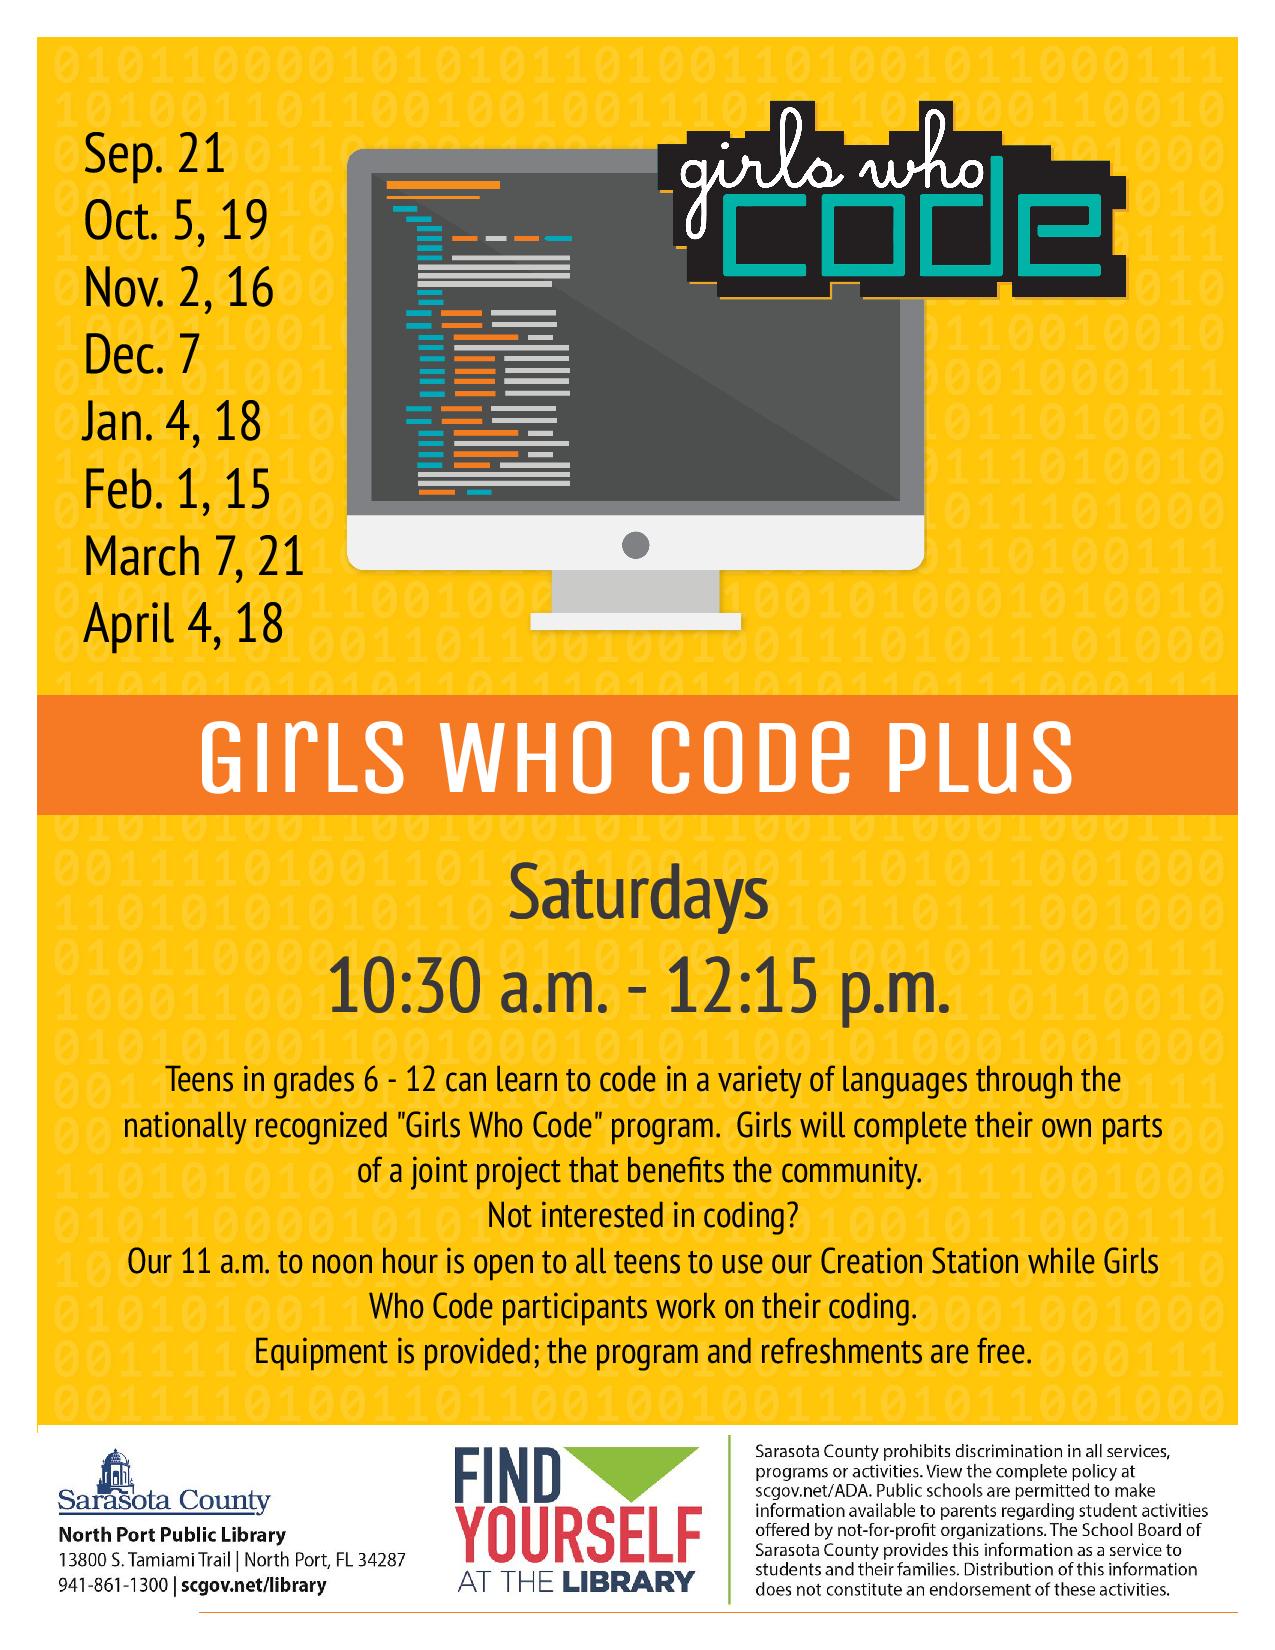 Teens in grades 6 - 12 can learn to code in a variety of languages through the nationally recognized "Girls Who Code" program. Girls will complete their own parts of a joint project that benefits the community. Not interested in coding? Our 11 a.m. to noon hour is open to all teens to use our Creation Station while Girls Who Code participants work on their coding. Equipment is provided; the program and refreshments are free.